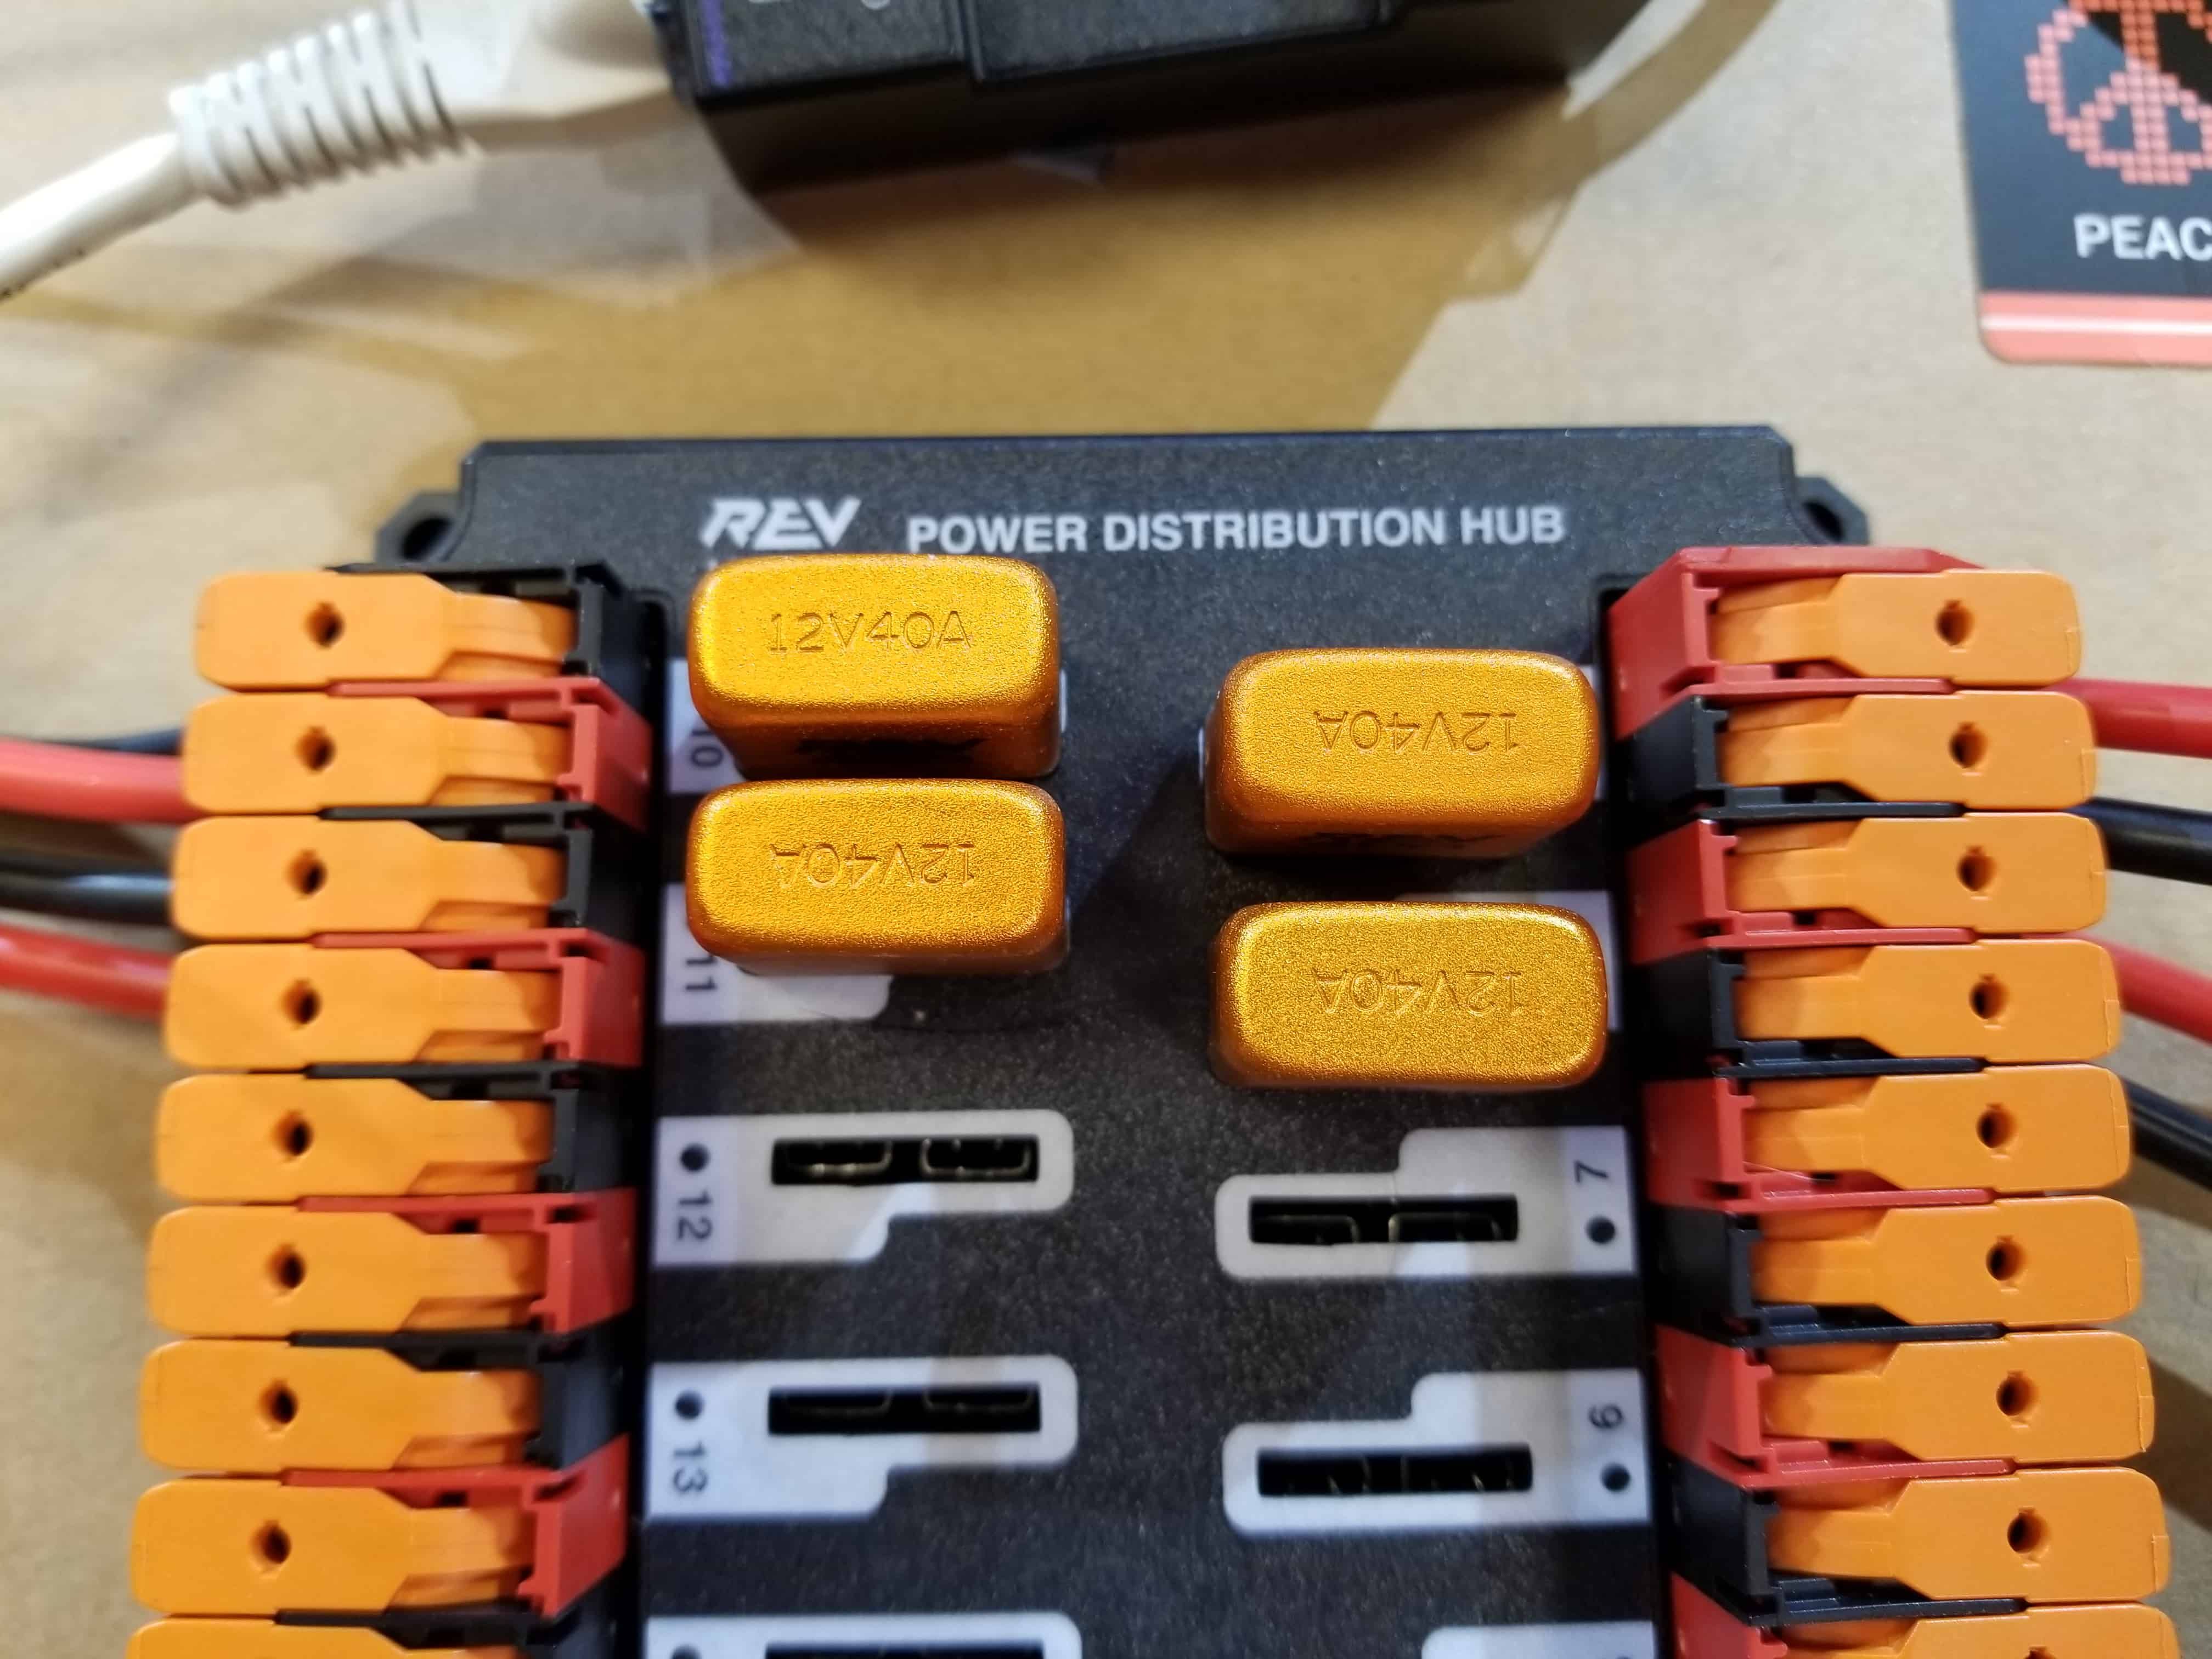 Installing 40A breakers in the PDP.